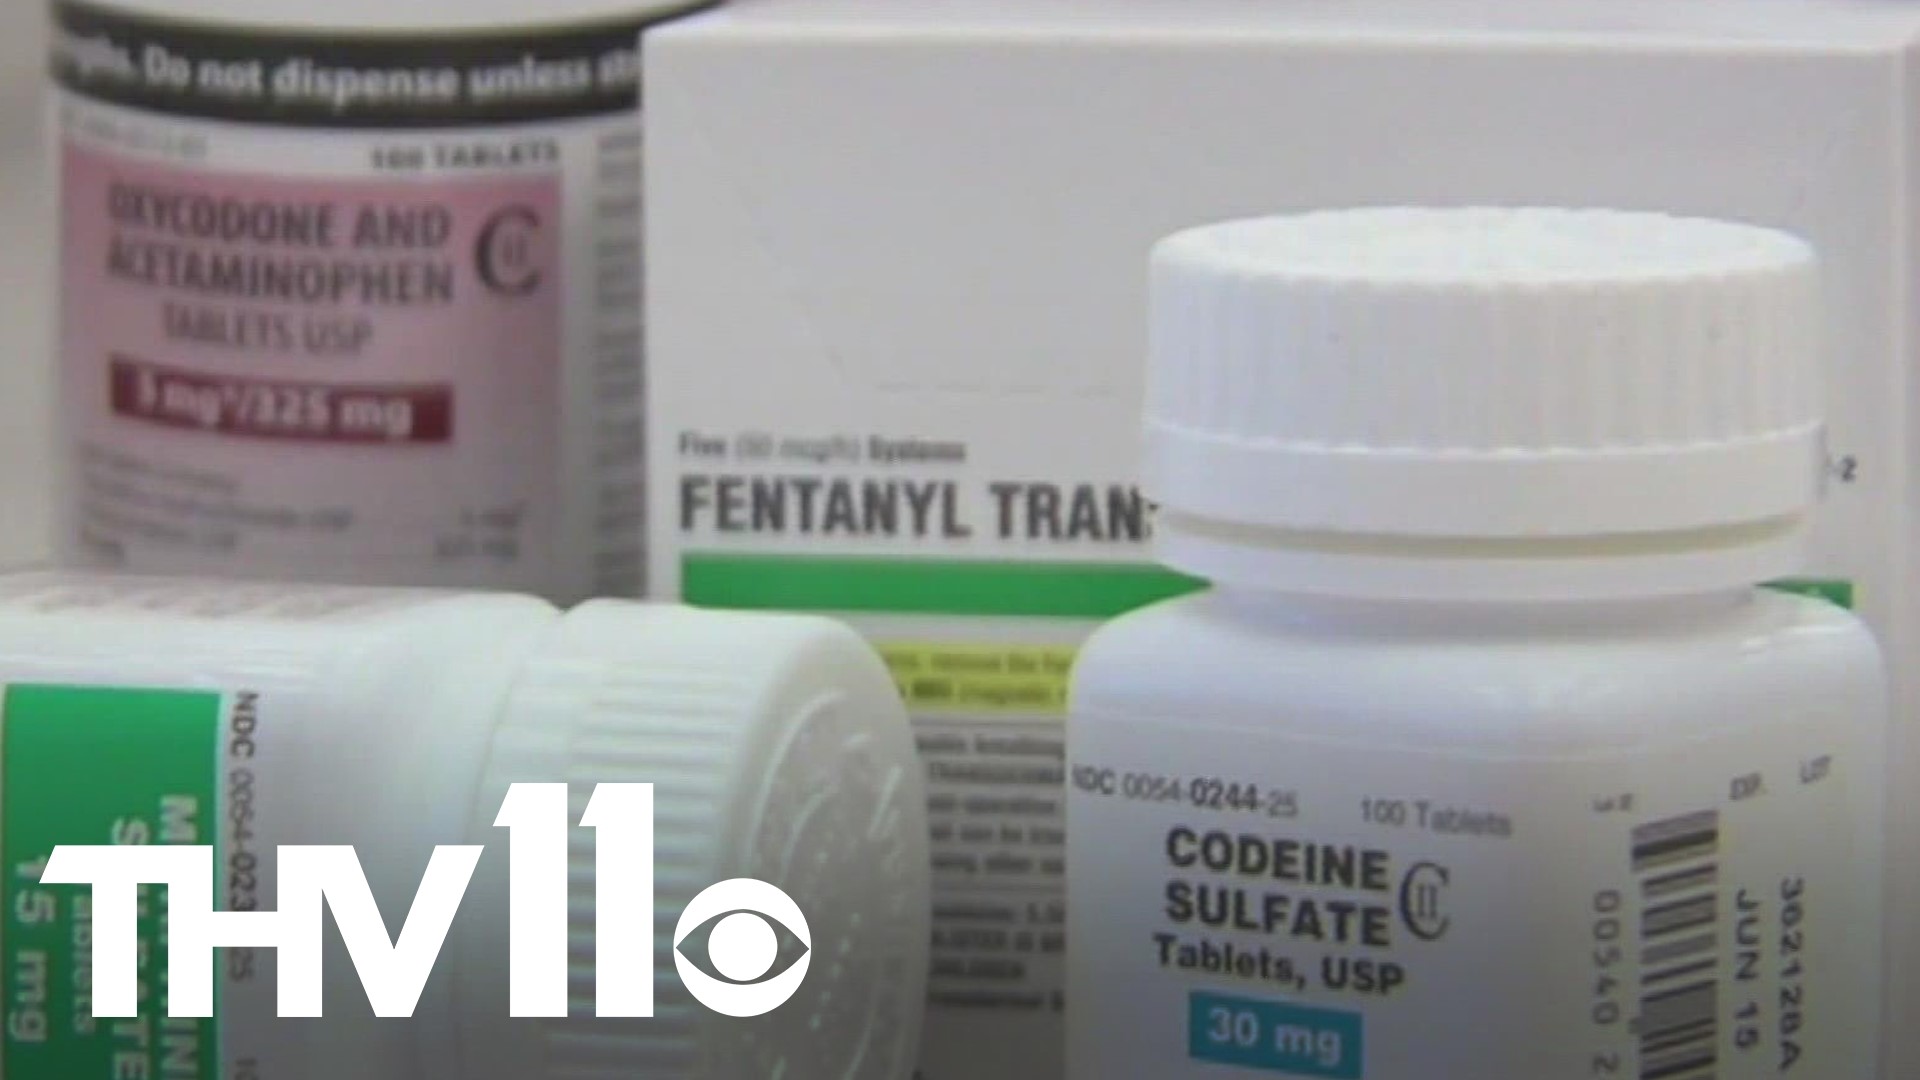 A new training effort is hoping to slow down opioid deaths in Arkansas.